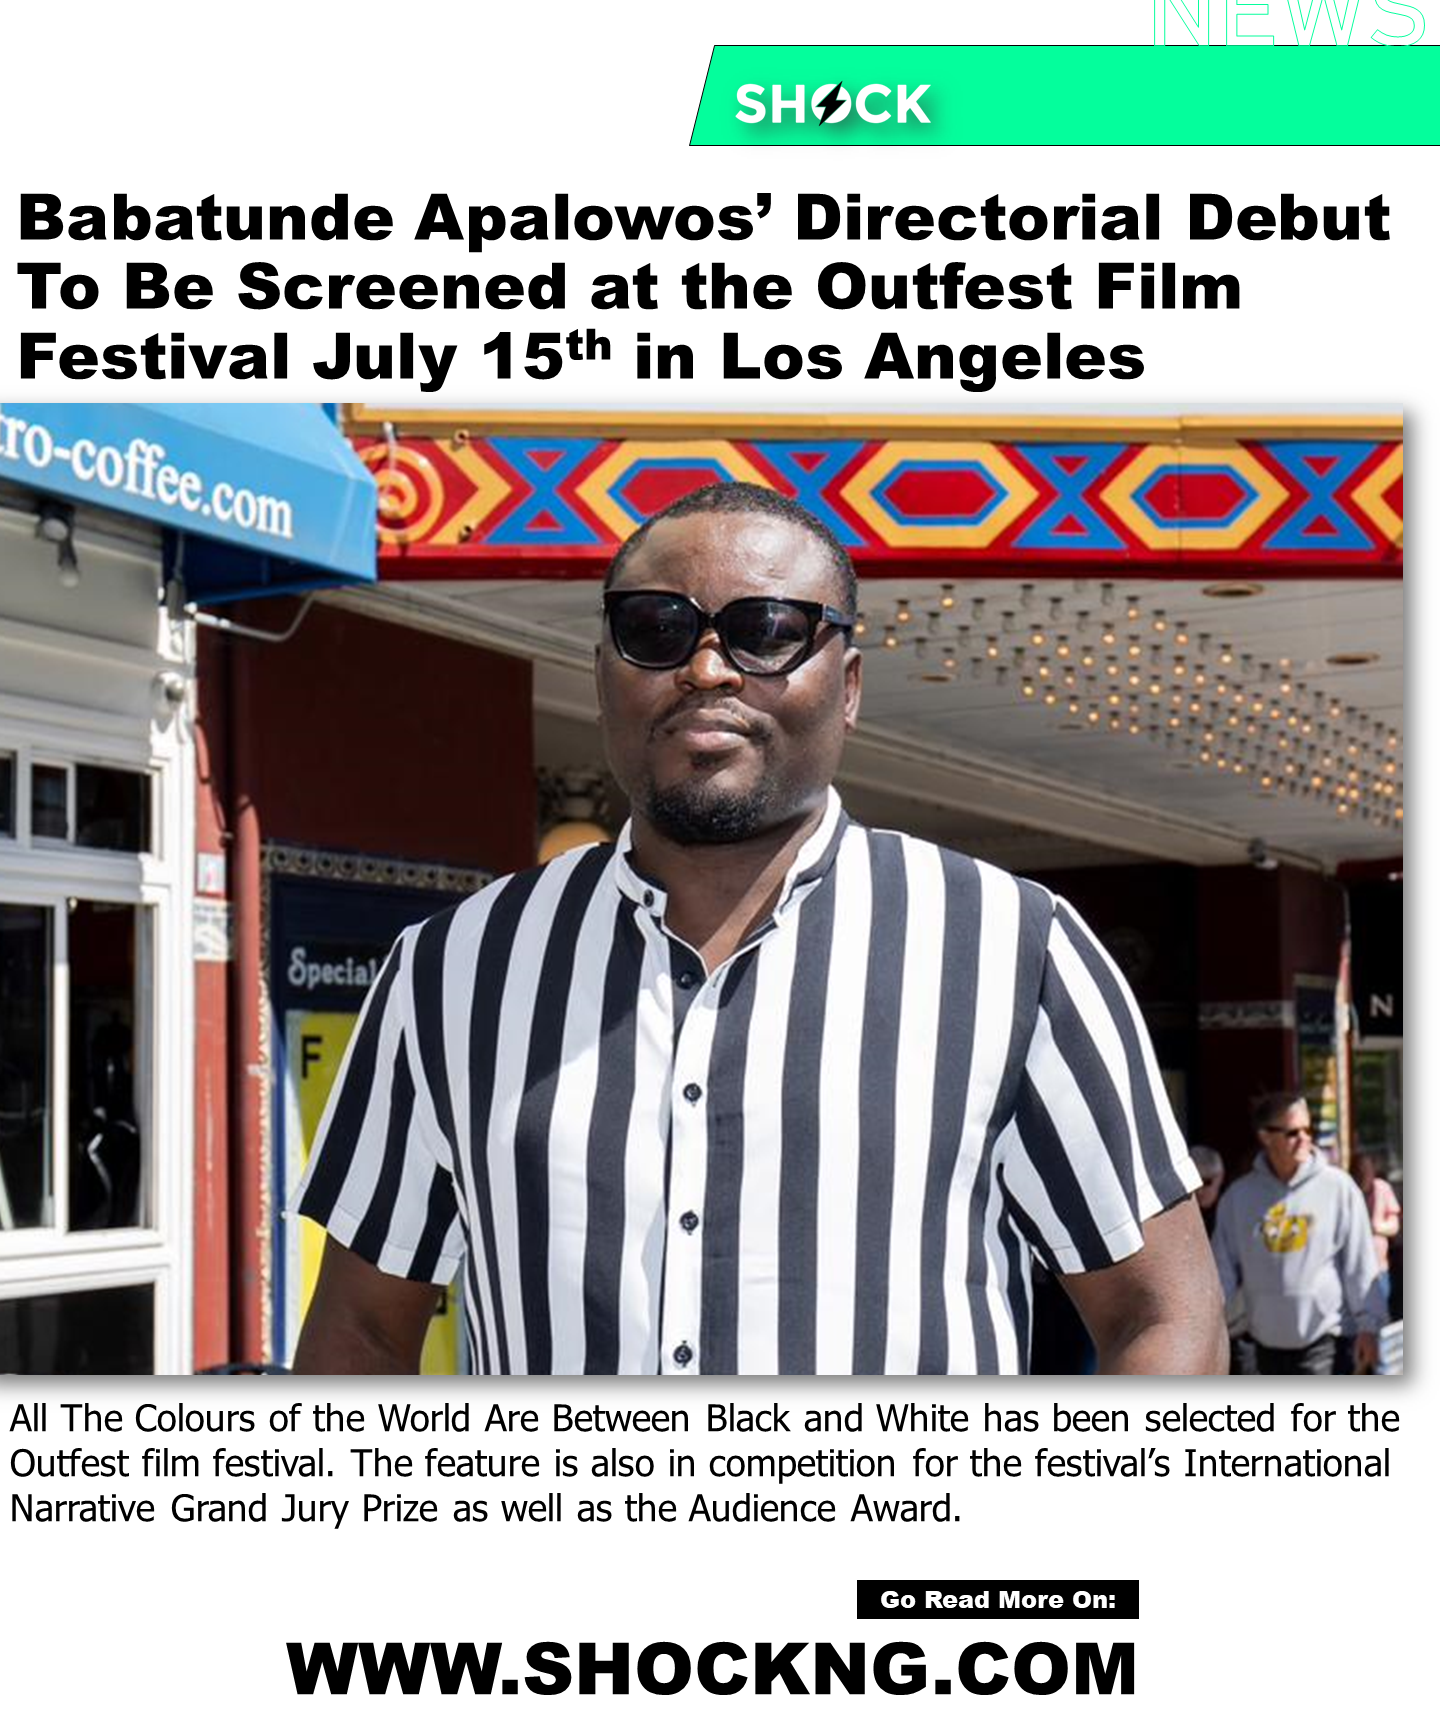 nigerian director babatunde apalowo - Babatunde Apalowo's Directorial Debut Title To Be Screened At The Outfest Film Festival